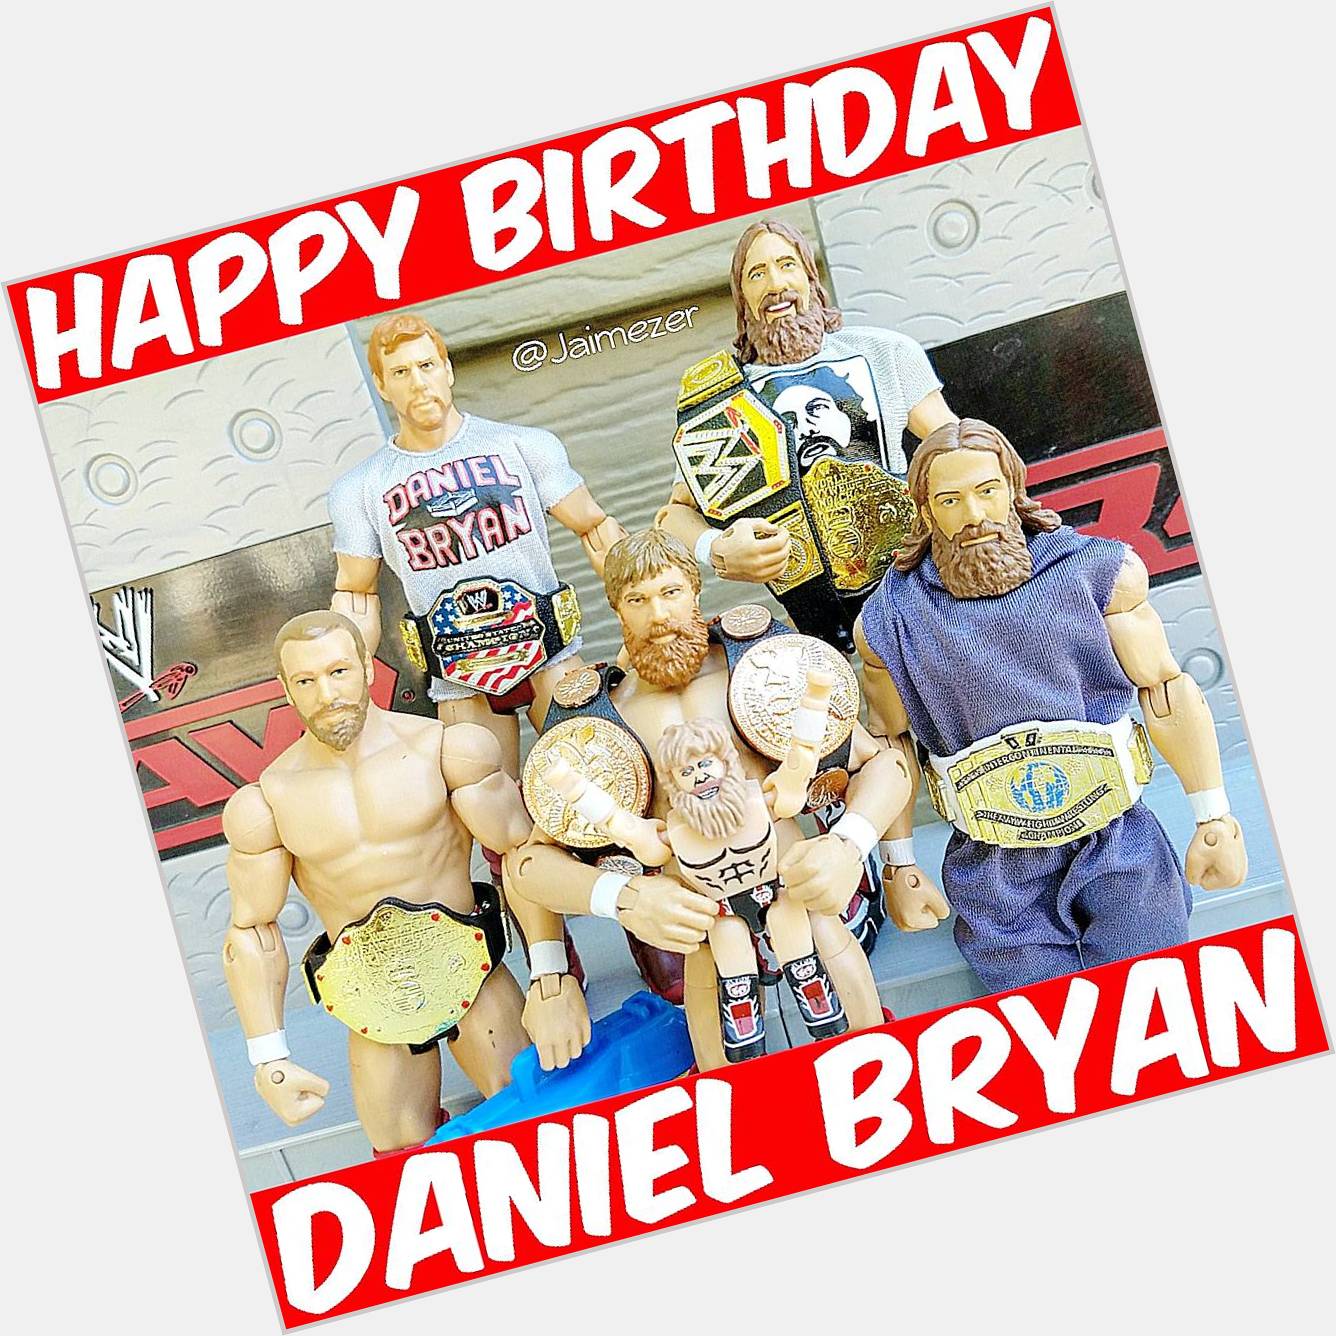 Happy Birthday to the General Manager of Daniel Bryan!  